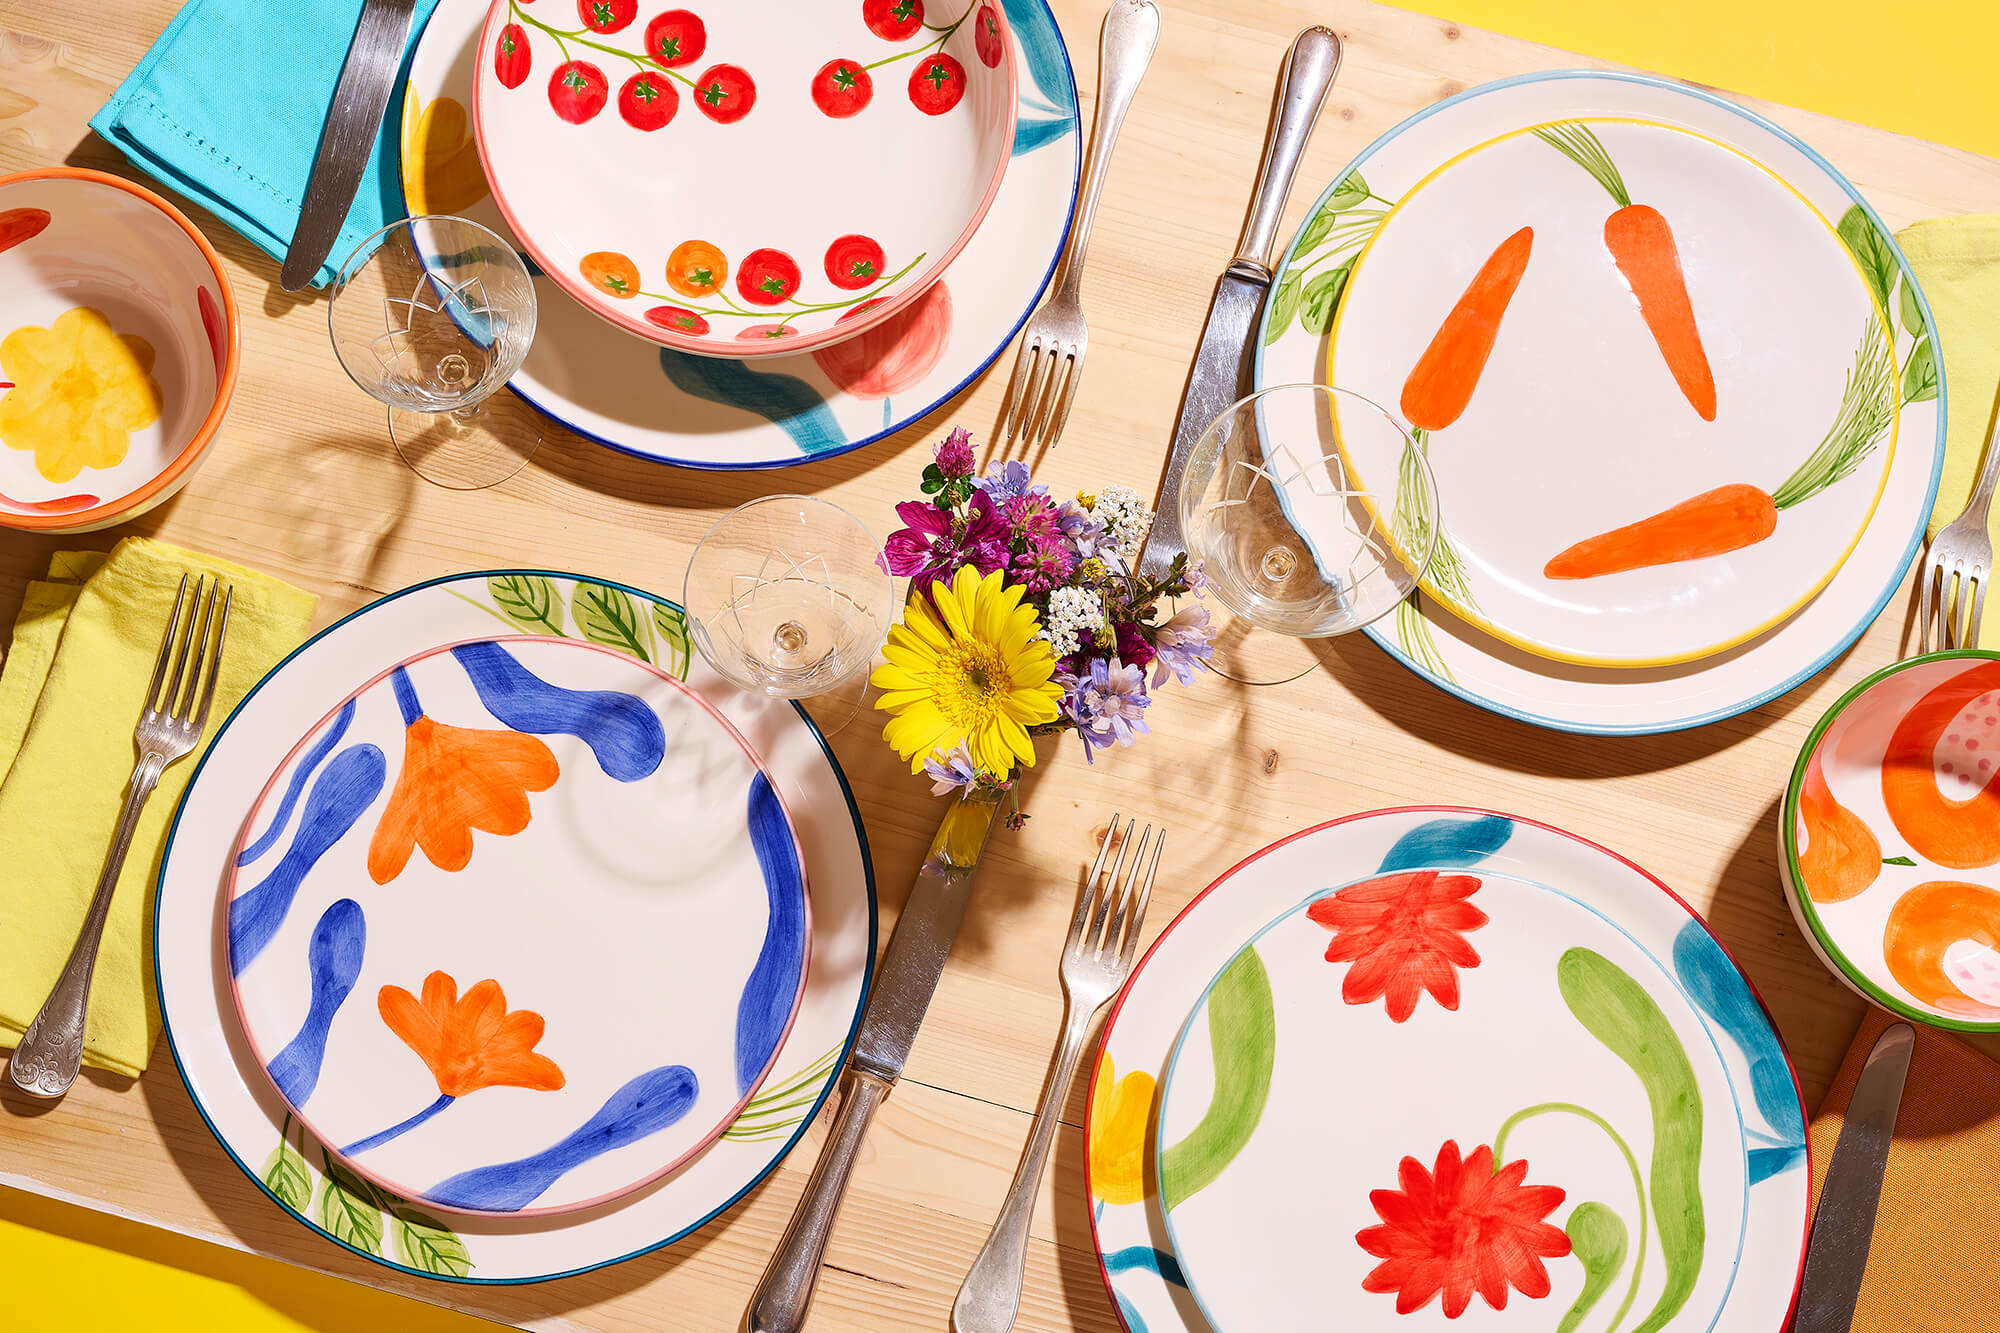 Why Choose Artisanal and Unique Dishware Over Mass-Produced Plates?